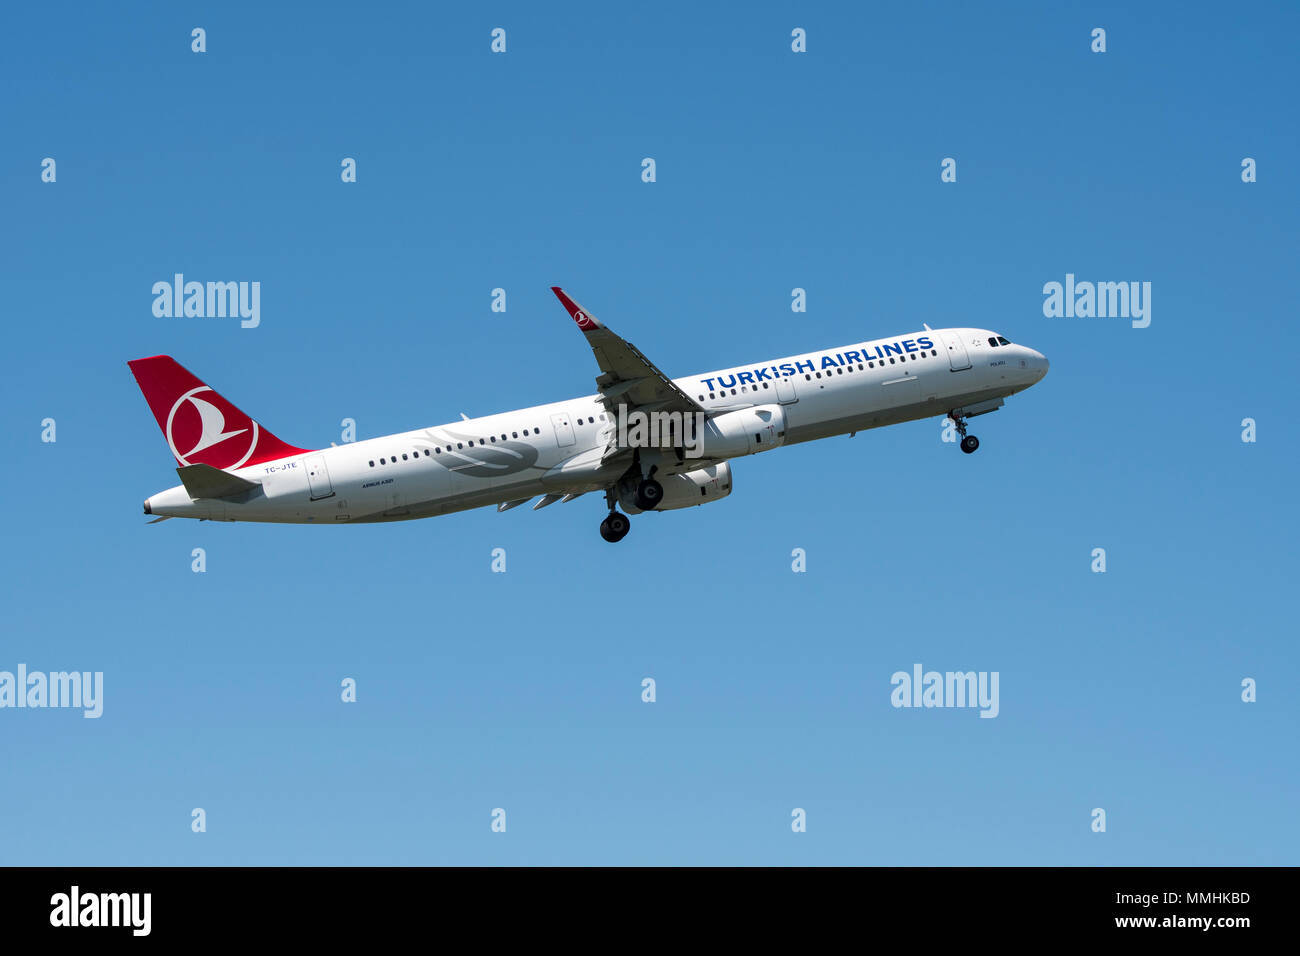 Airbus A321-231, narrow-body, commercial passenger twin-engine jet airliner from Turkish Airlines in flight against blue sky Stock Photo